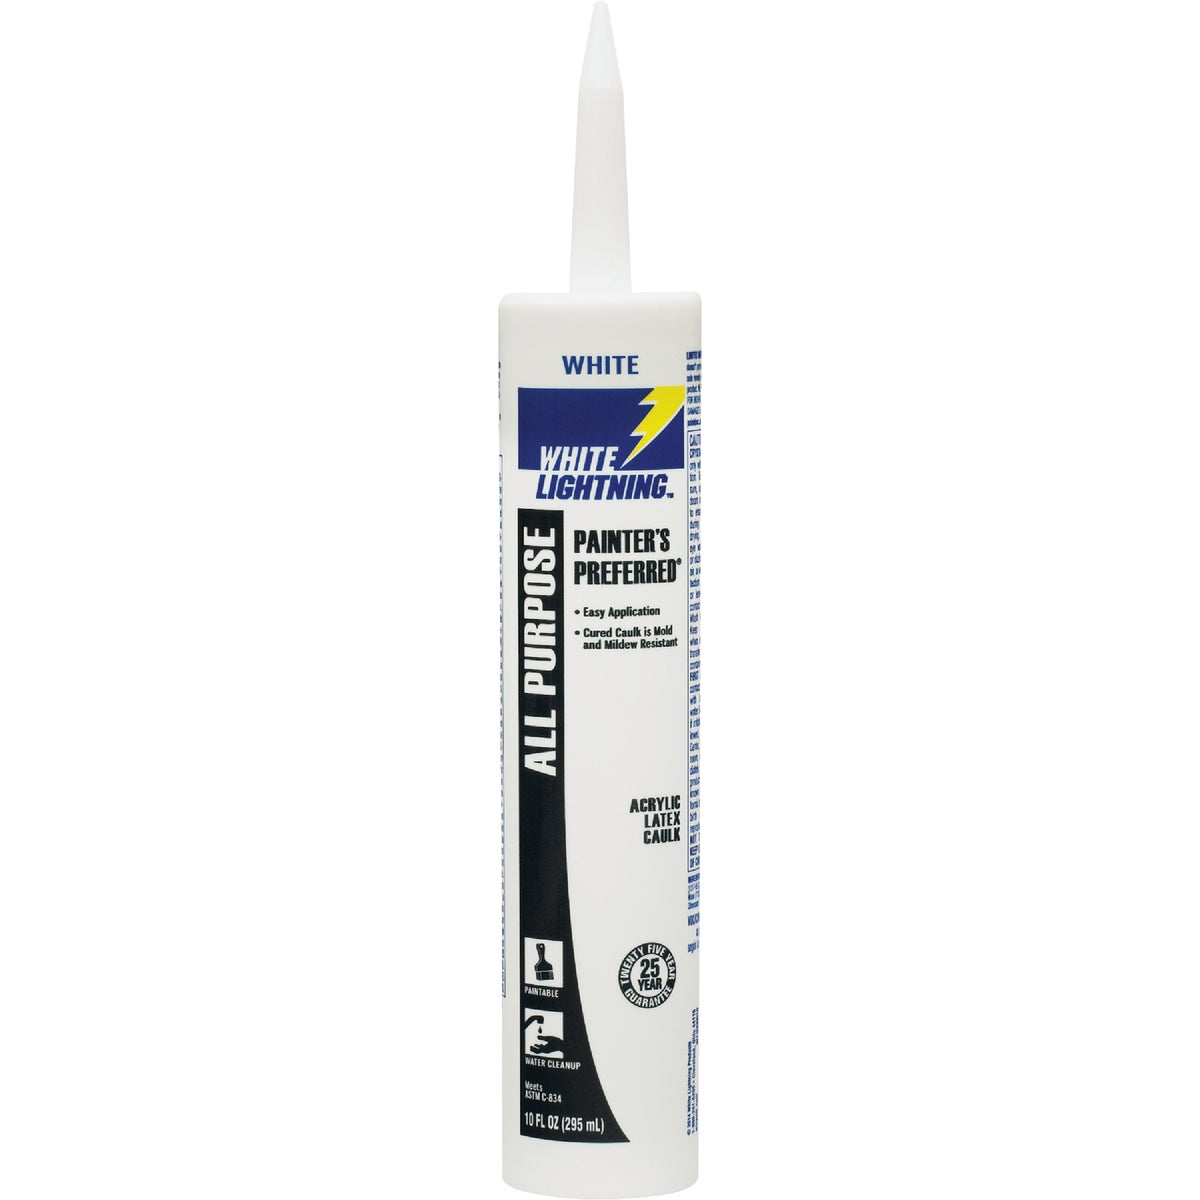 Item 787727, White Lightning Painter's Preferred is a an economical general purpose 